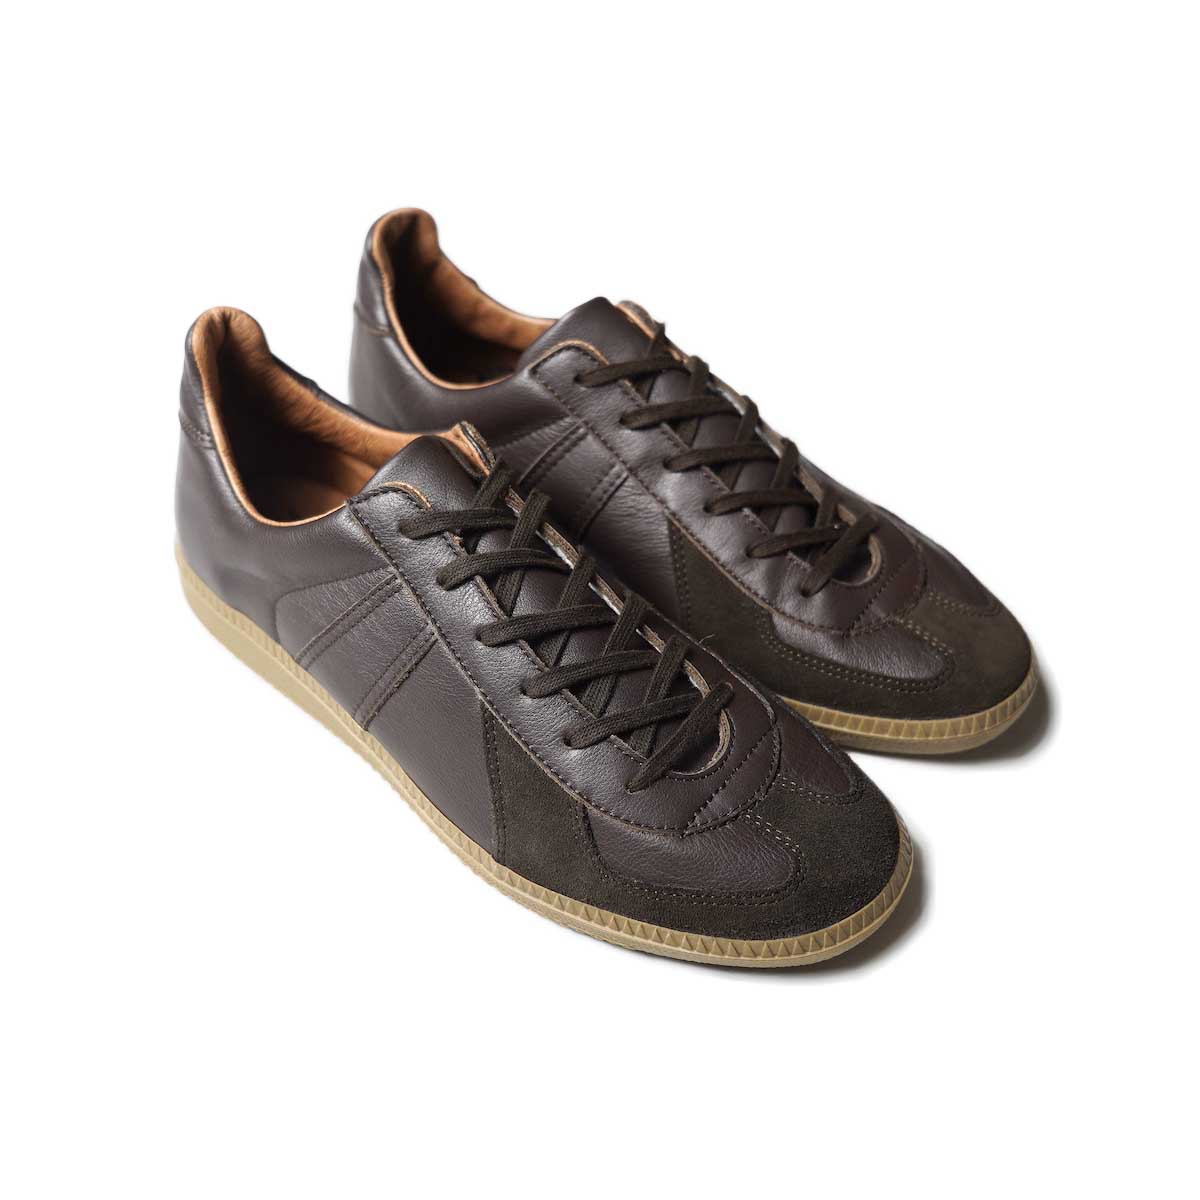 REPRODUCTION OF FOUND / GERMAN MILITARY TRAINER (Dark Brown)